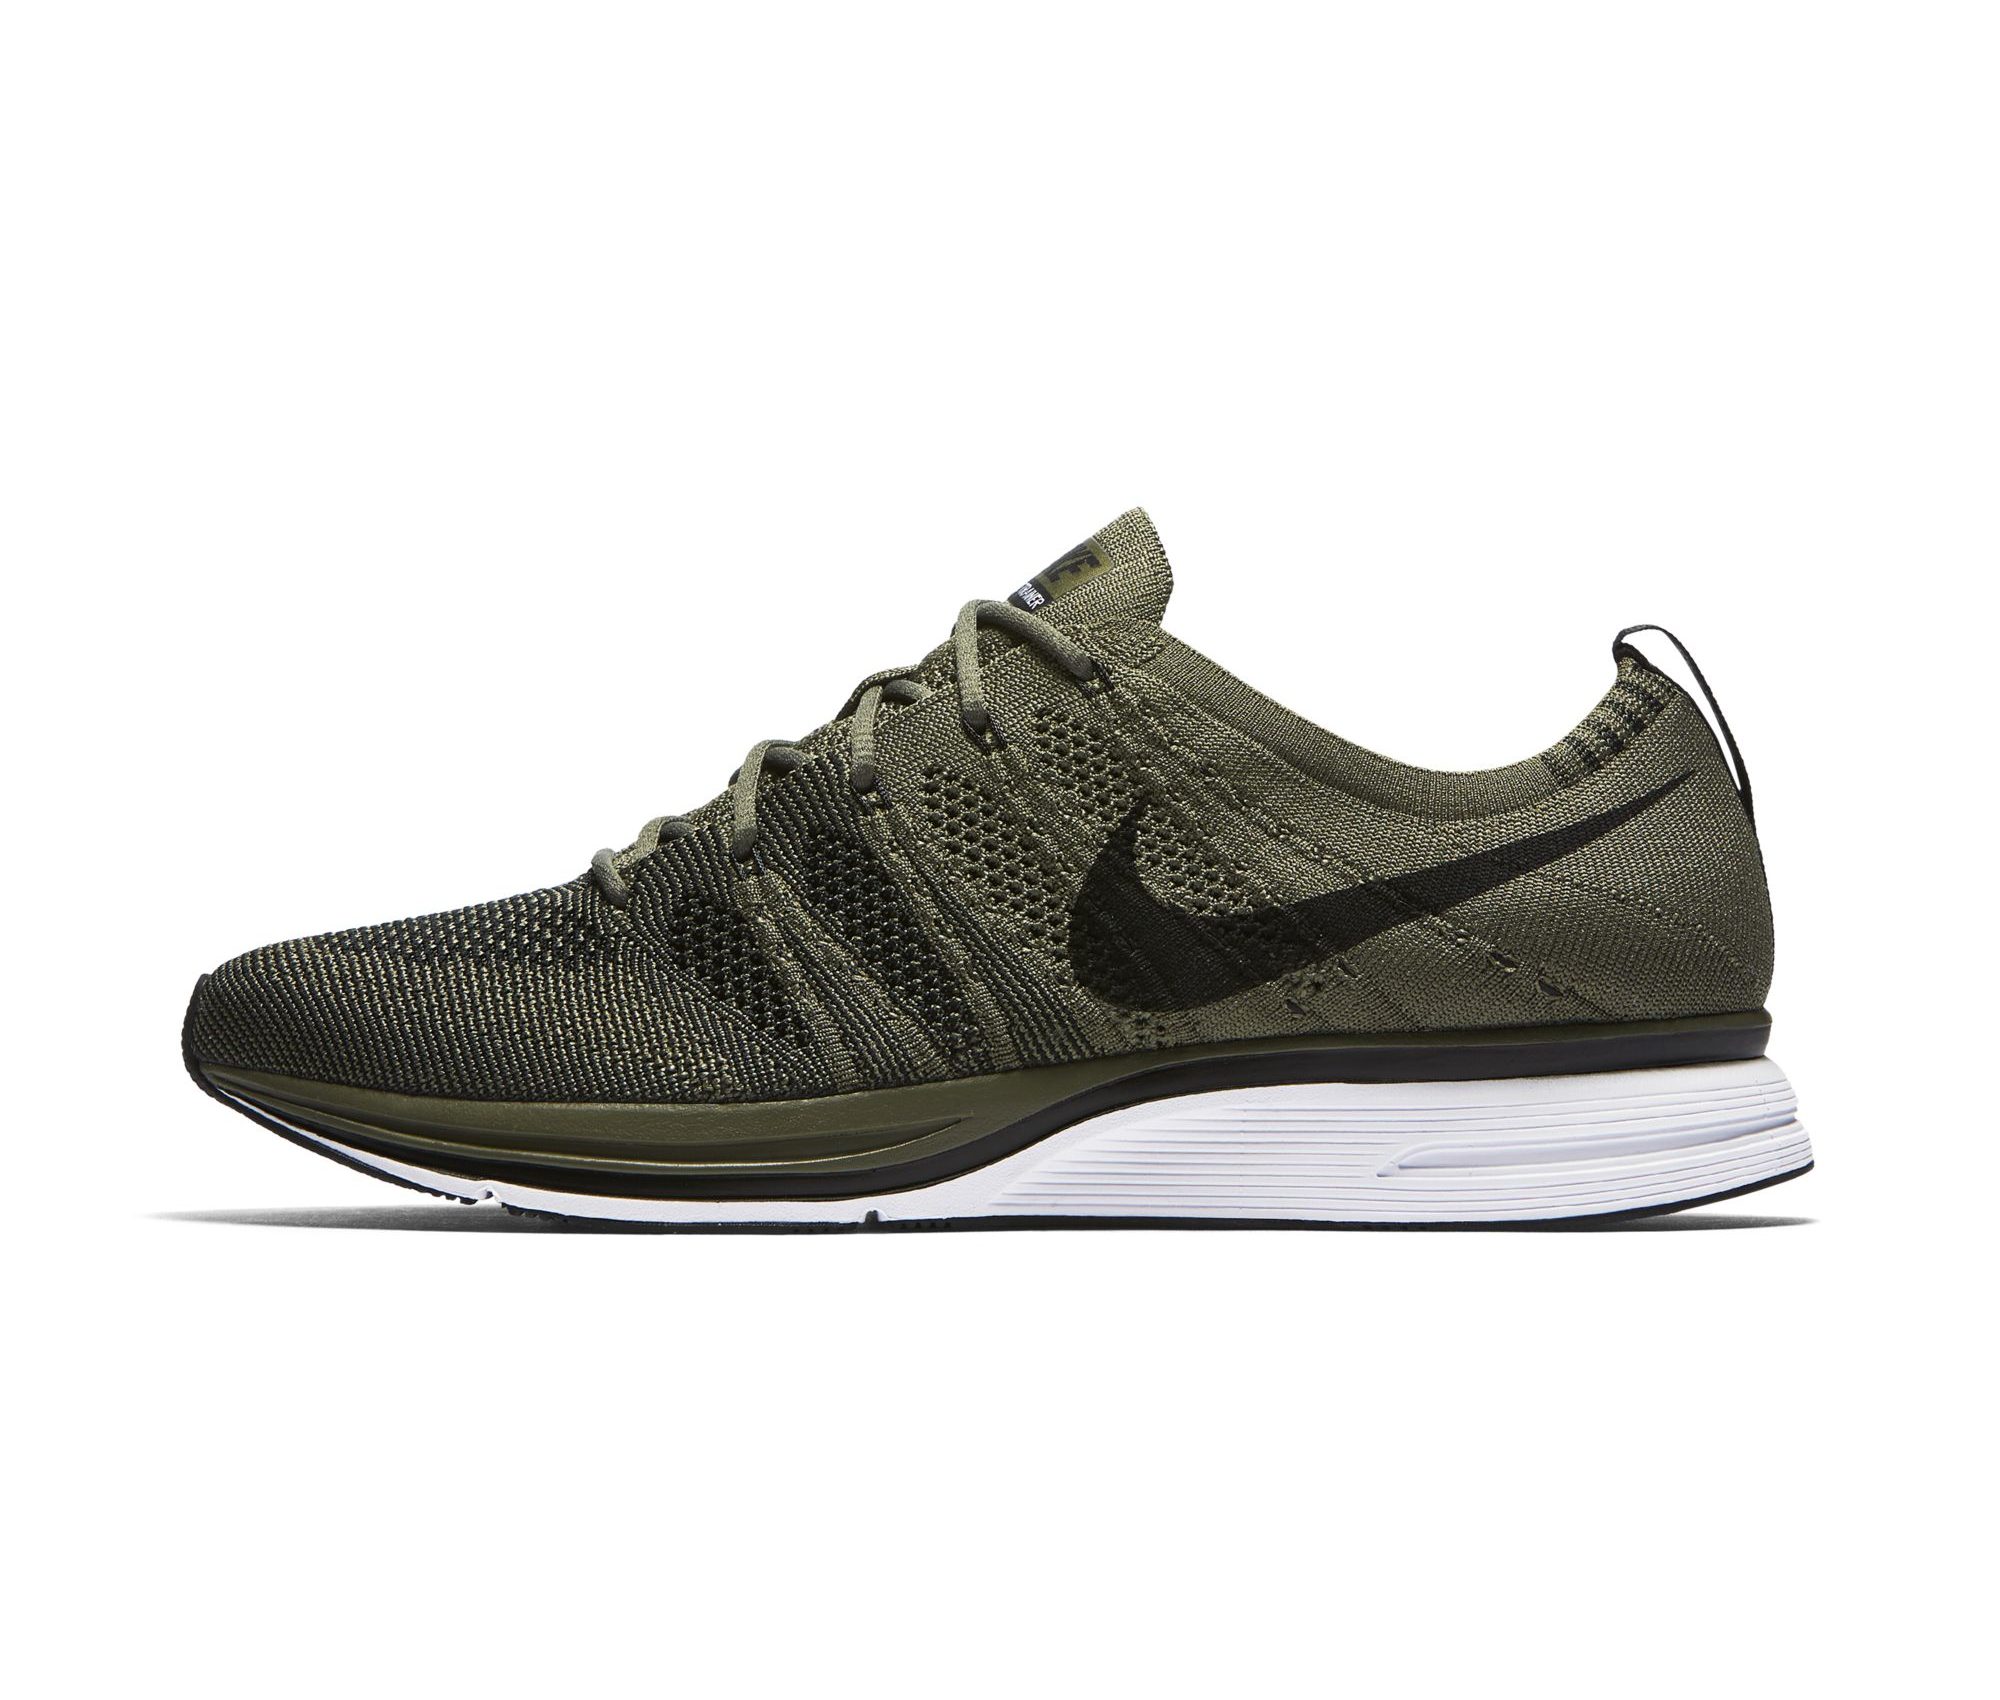 The Nike Flyknit Trainer 'Medium Olive 